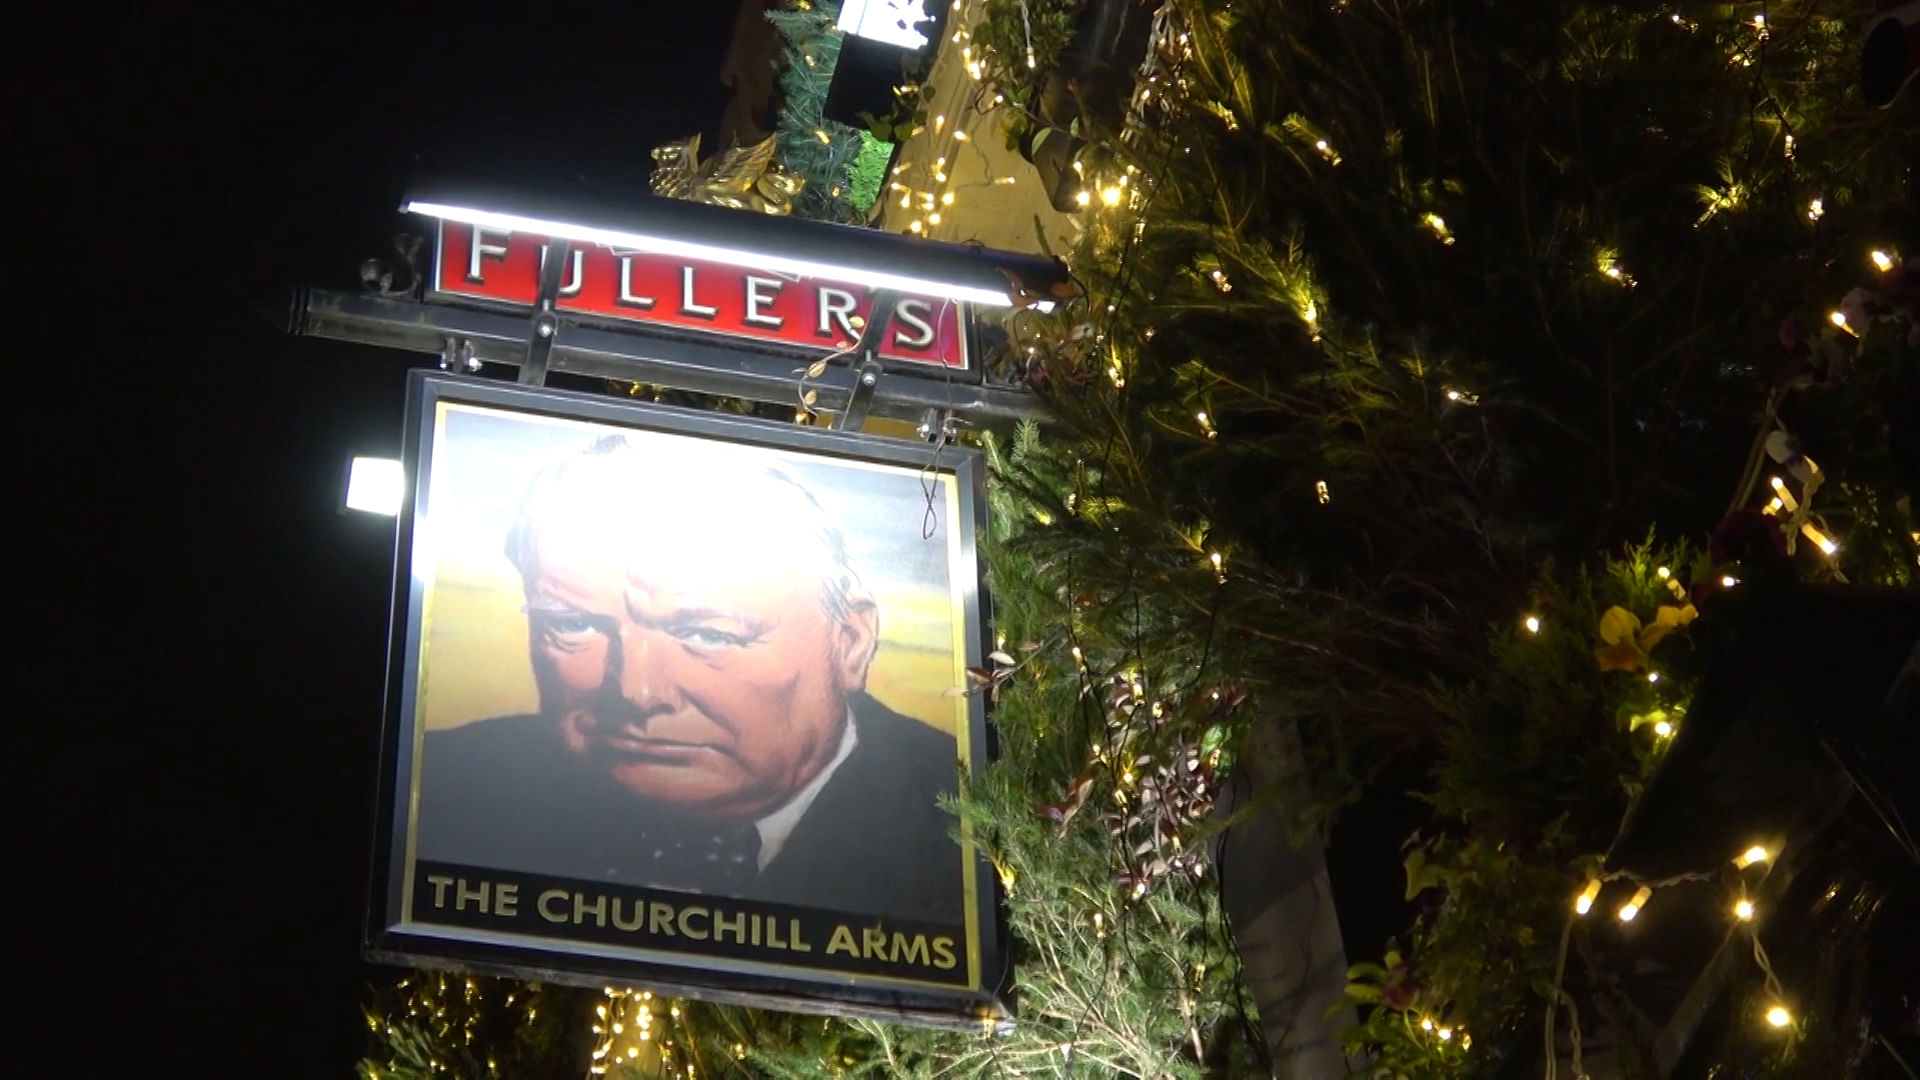 Britain’s ‘most festive pub’ decorated with 100 trees for Christmas.